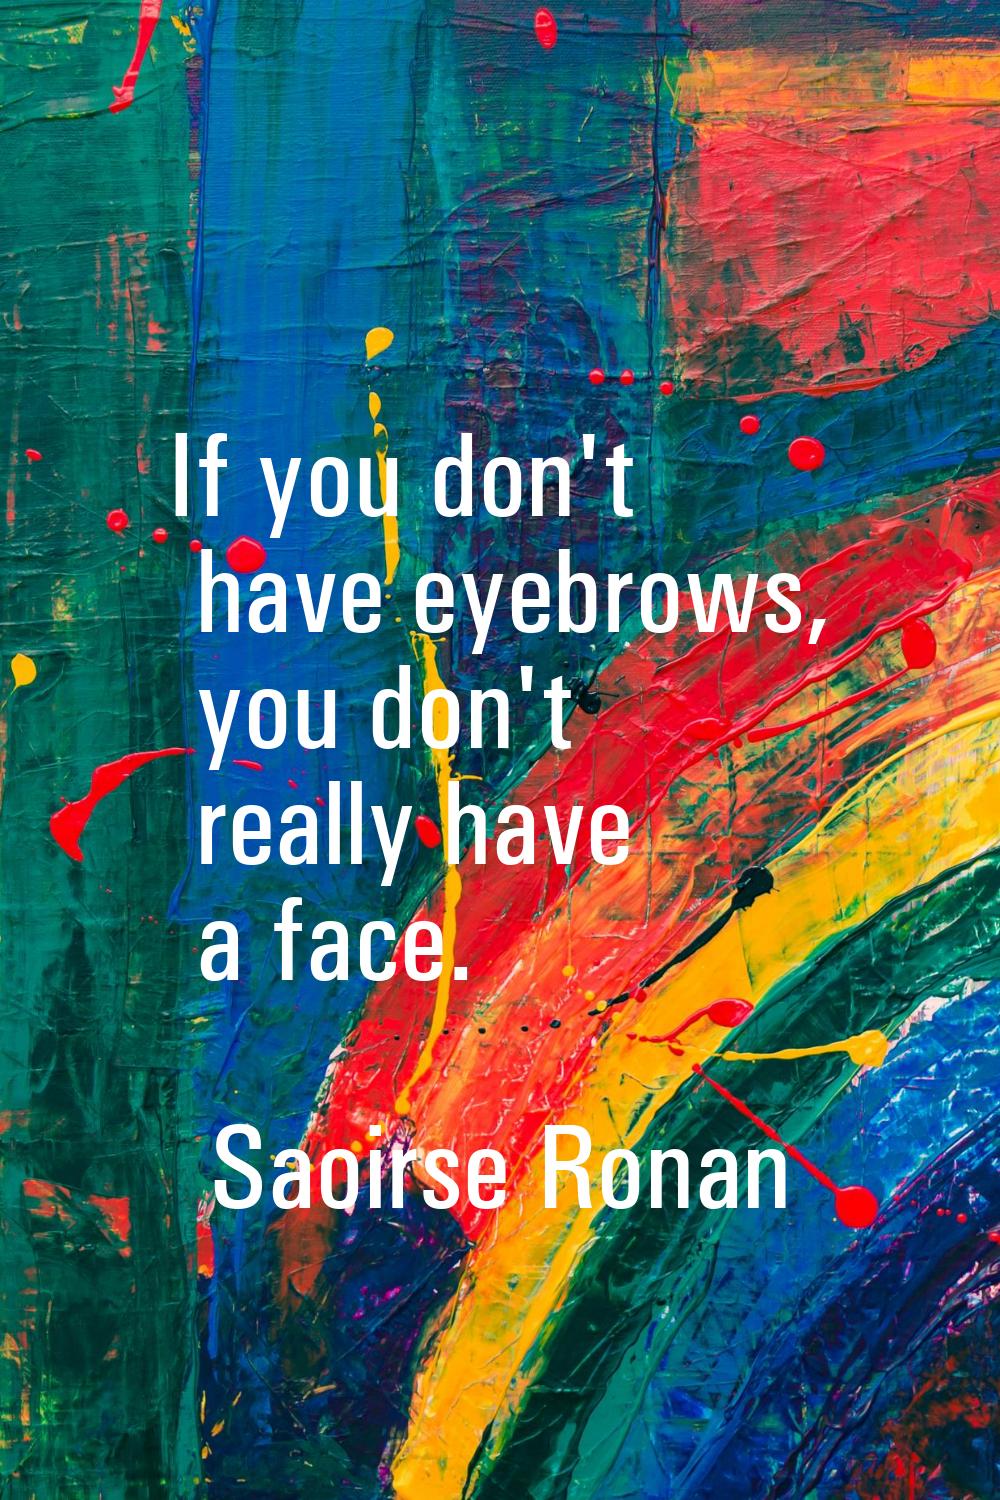 If you don't have eyebrows, you don't really have a face.